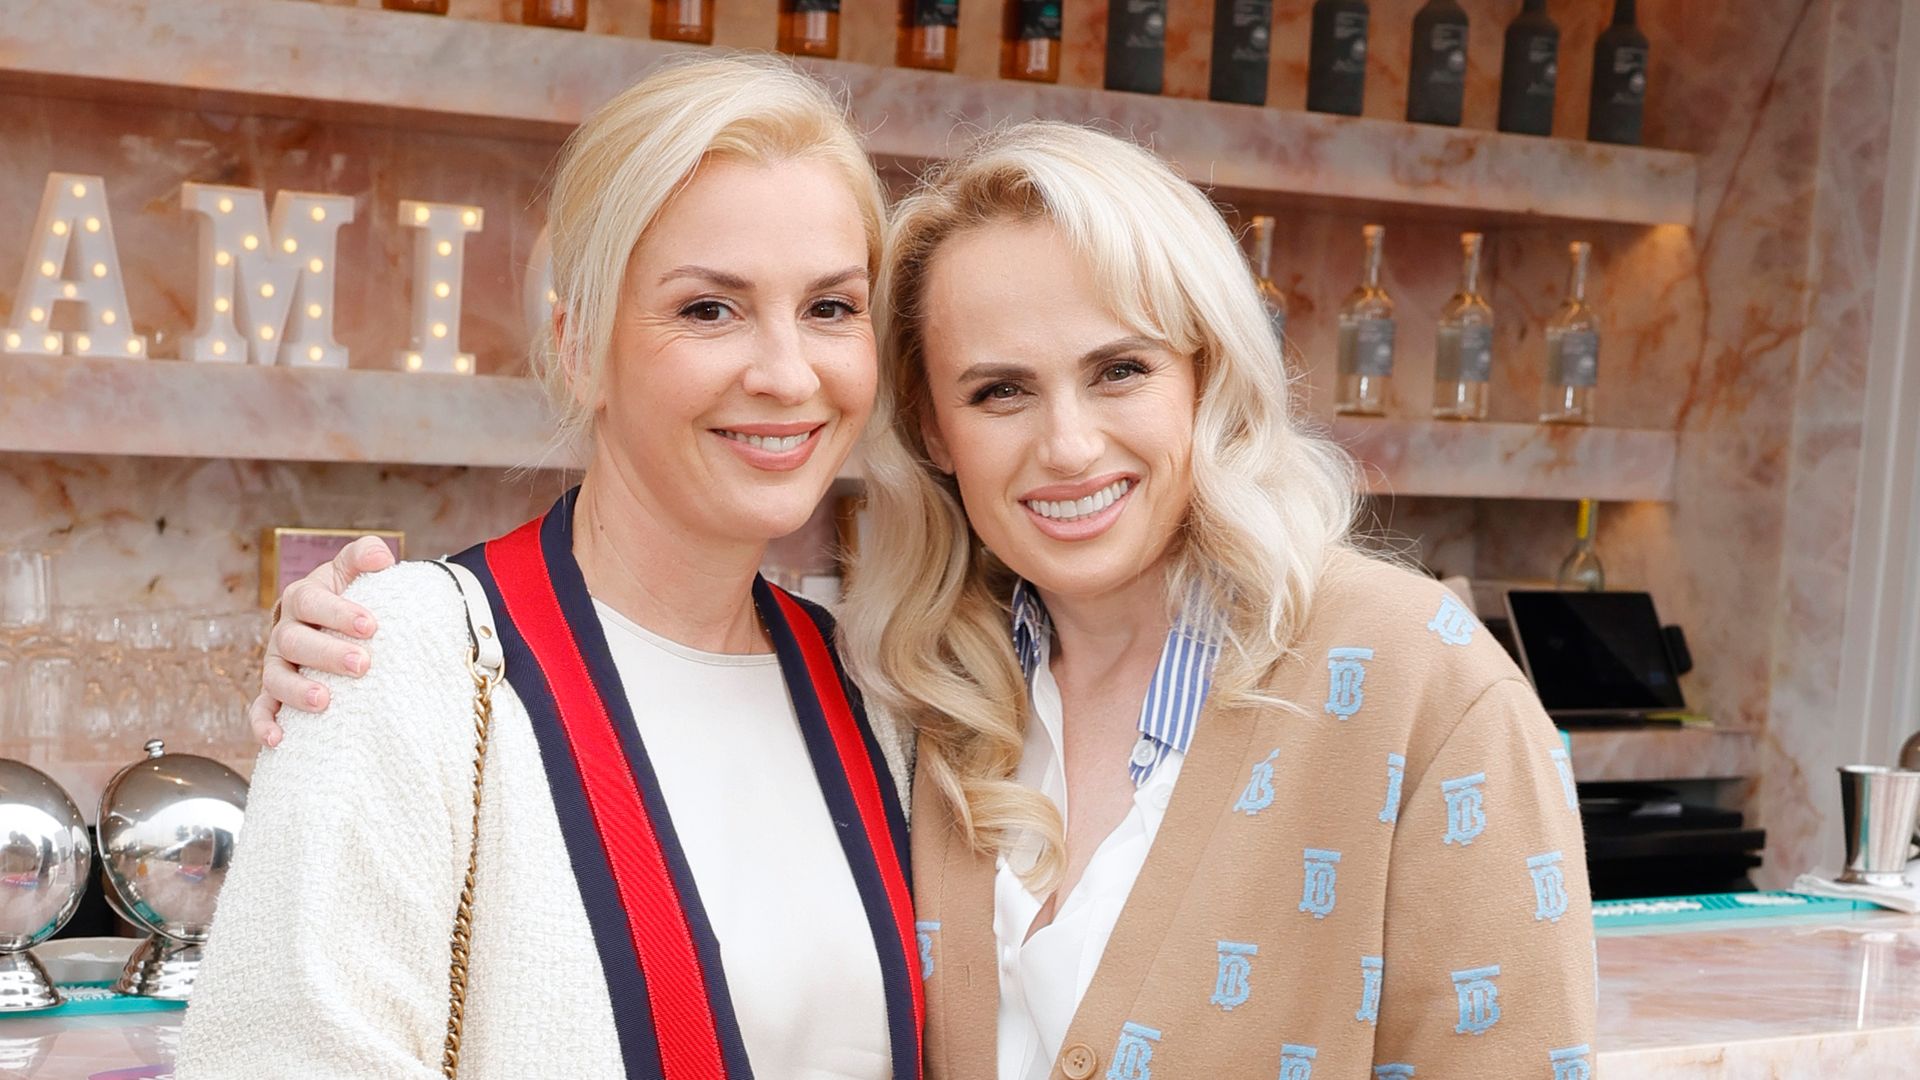 Ramona Agruma and Rebel Wilson, Fluid Co-Founder, attend the Fluid Launch Party and Mixology Hosted by Casamigos at Funke on June 15, 2023 in Los Angeles, California. (Photo by Stefanie Keenan/Getty Images for Casamigos)